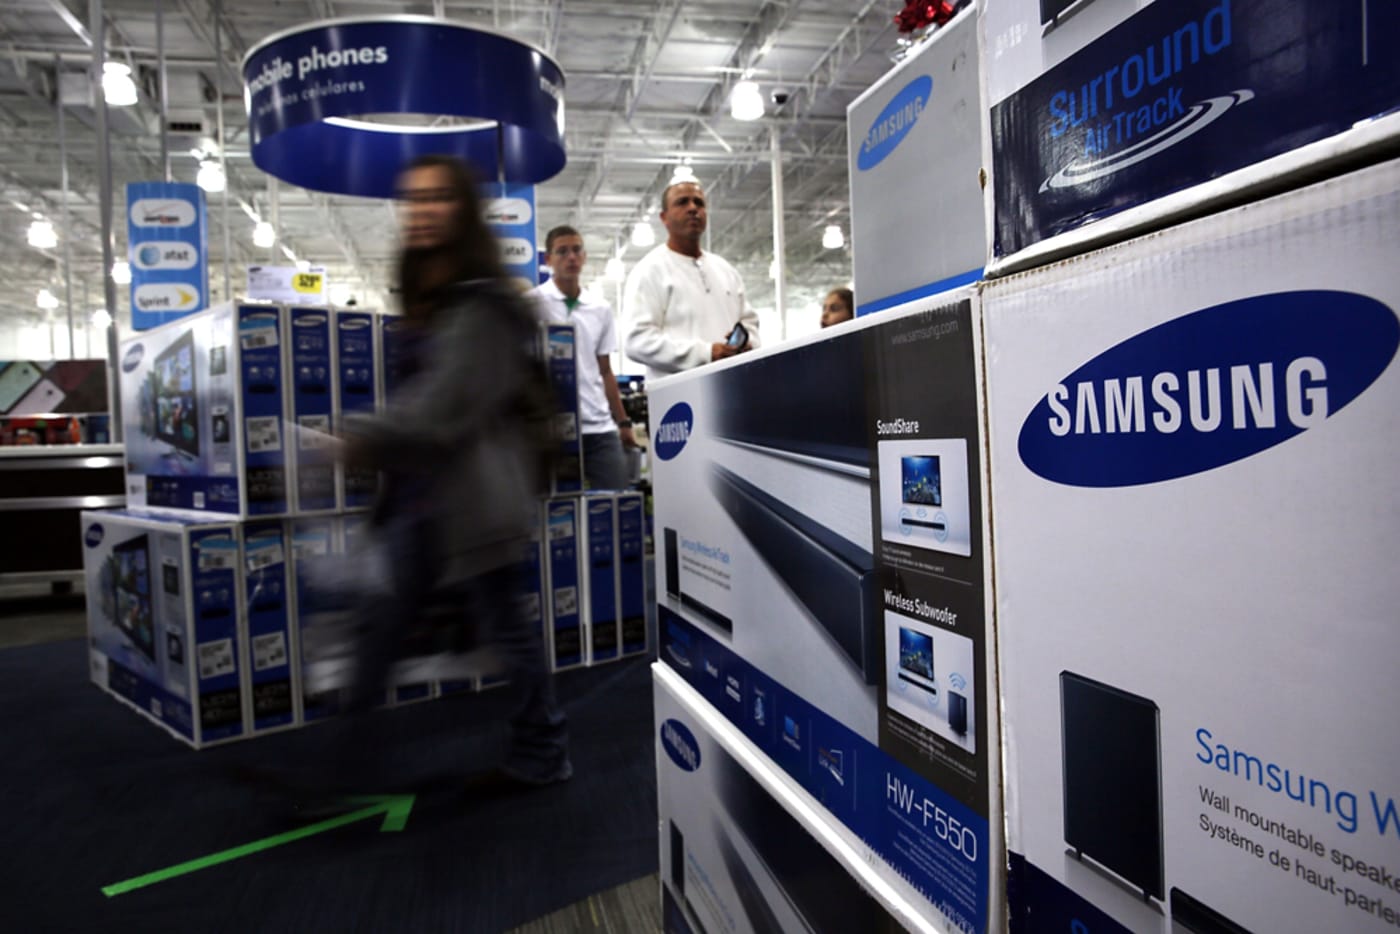 Black Friday shoppers looks for deals at a Best Buy store